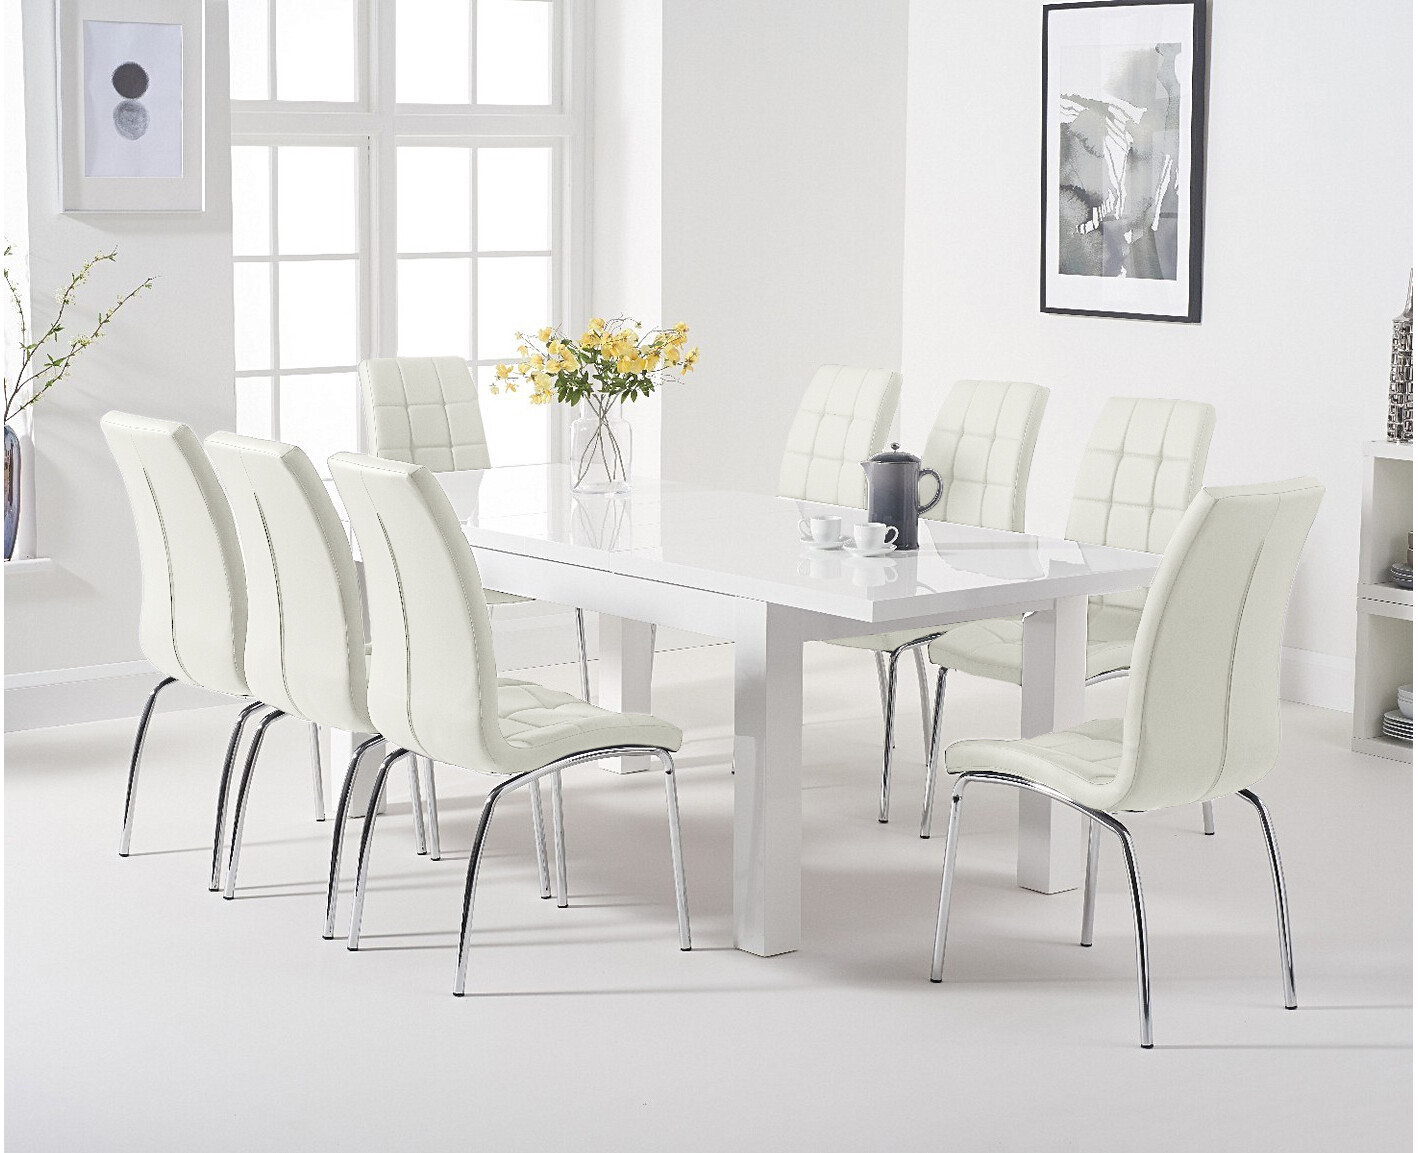 Extending Atlanta 160cm White High Gloss Dining Table With 4 Red Enzo Chairs